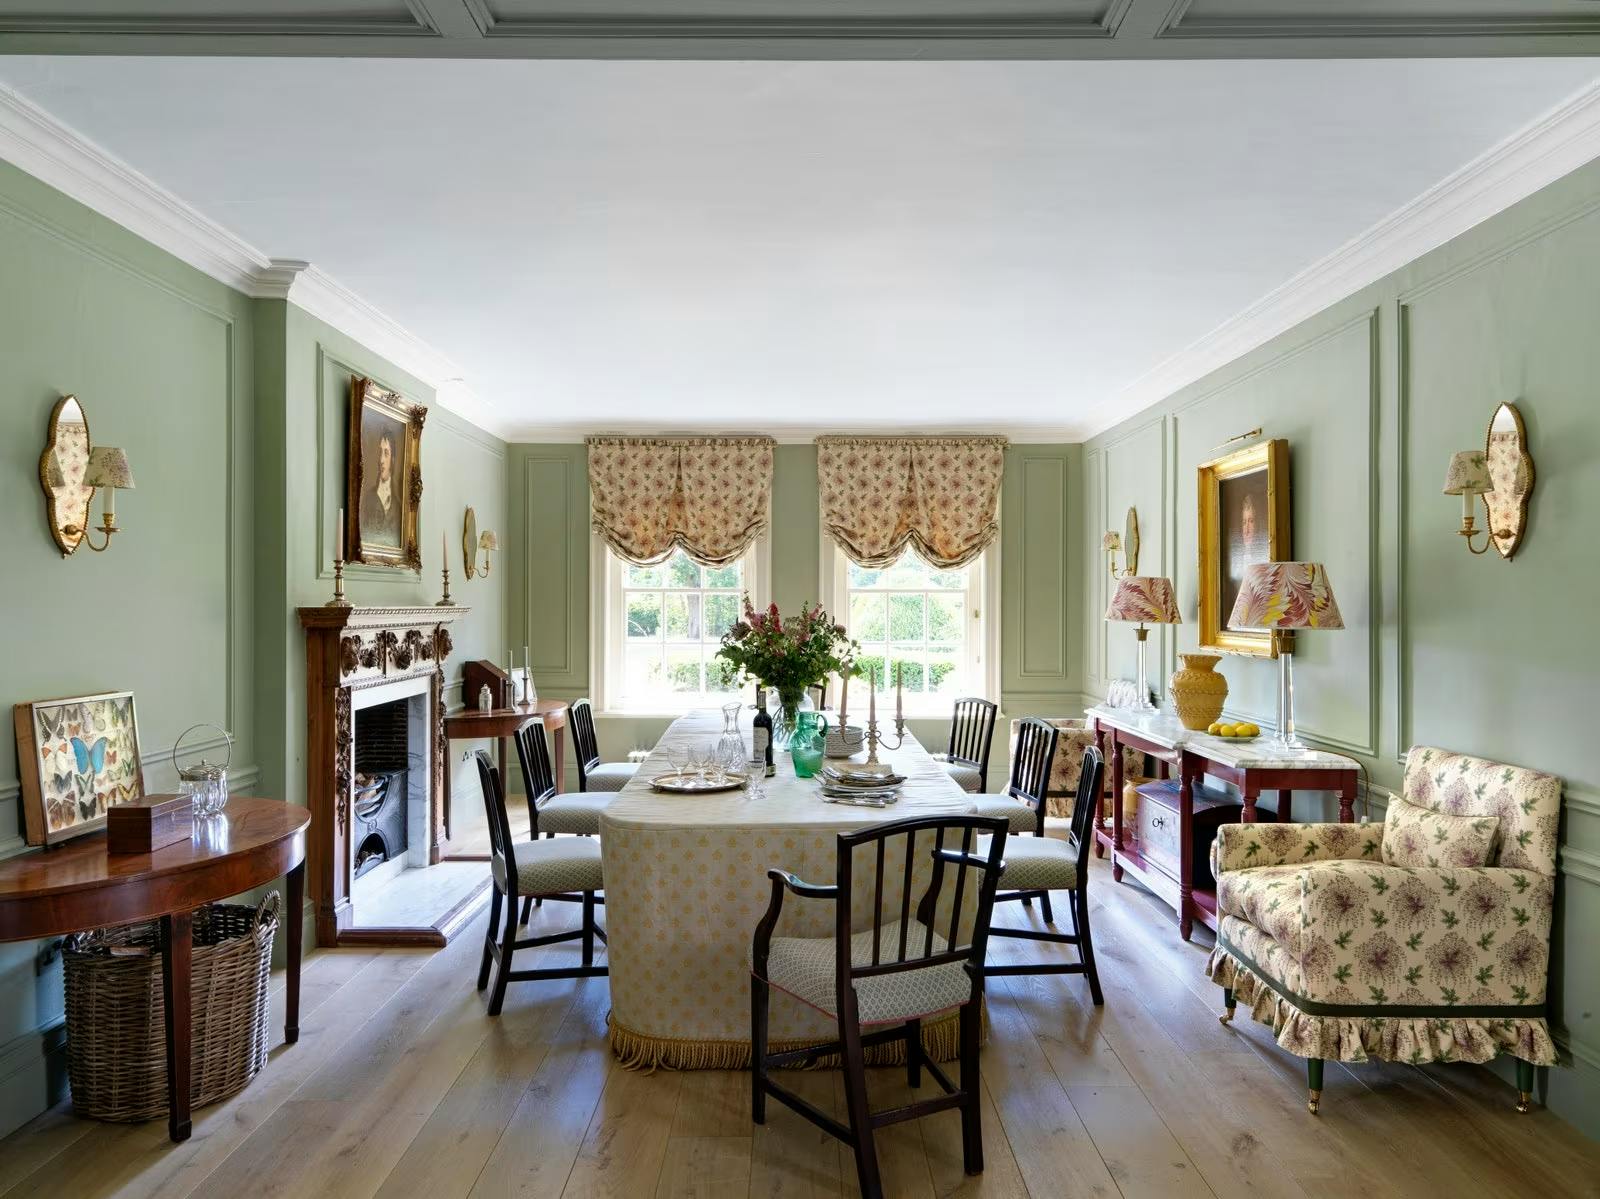 Lichen by Farrow & Ball, featured in Architectural Digest, designed by Salvesen Graham, photo by Simon Brown